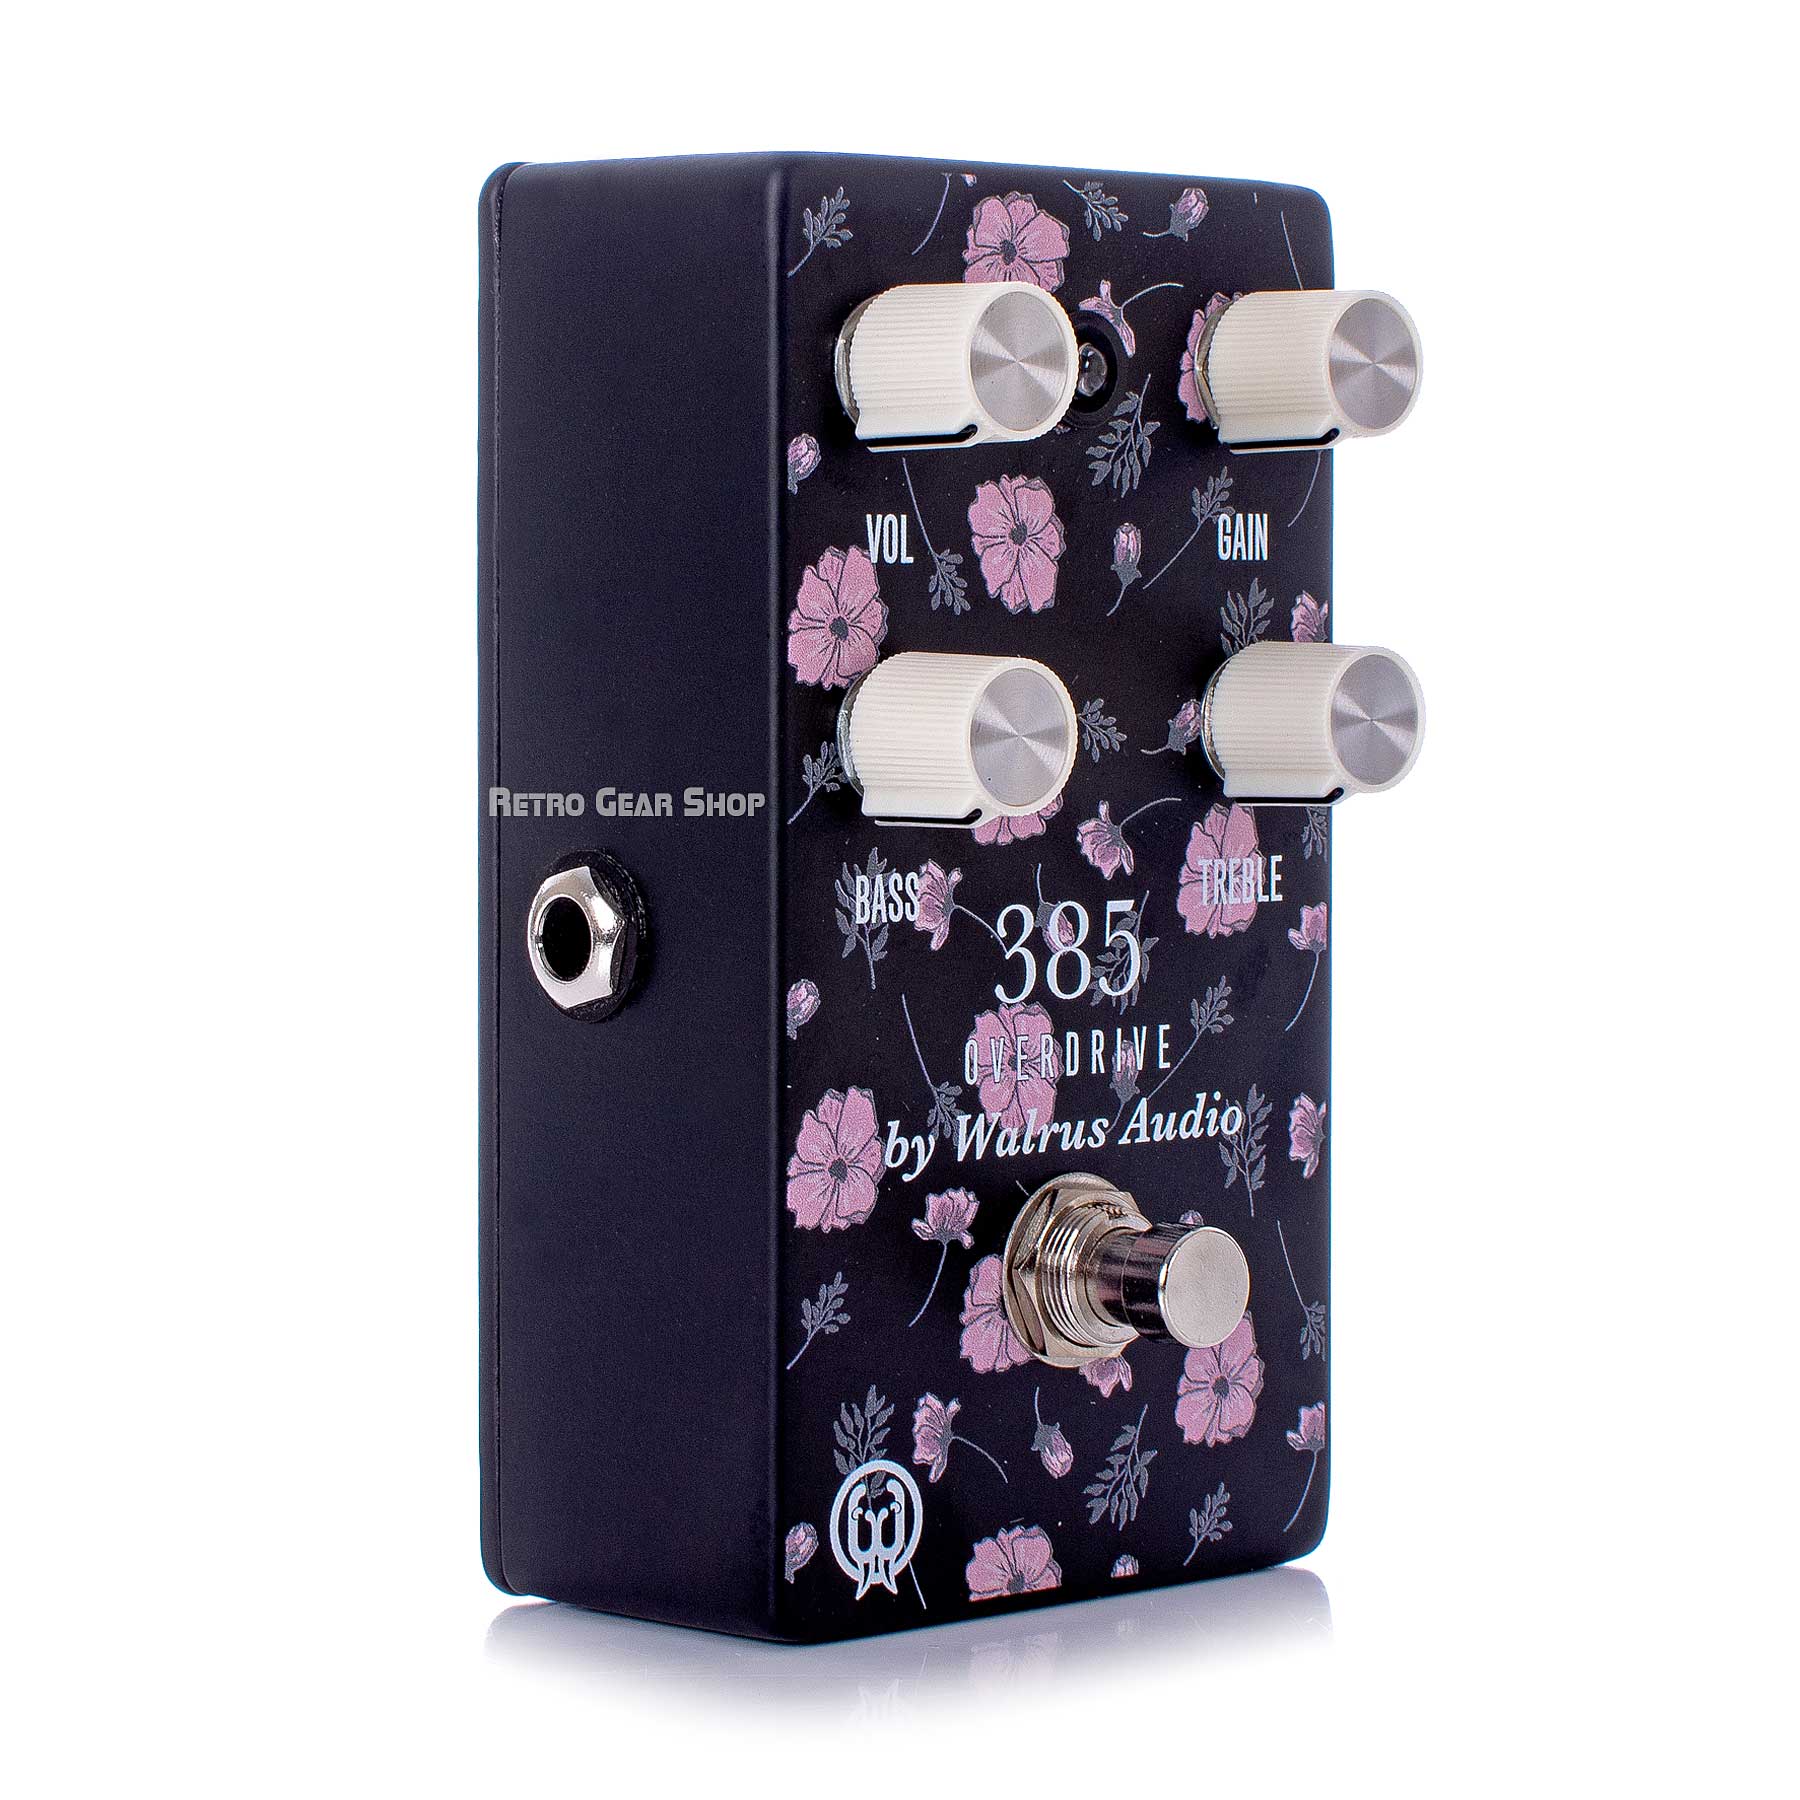 Walrus Audio 385 Overdrive Distortion Floral Limited Edition Black Friday 2019 Guitar Effect Pedal